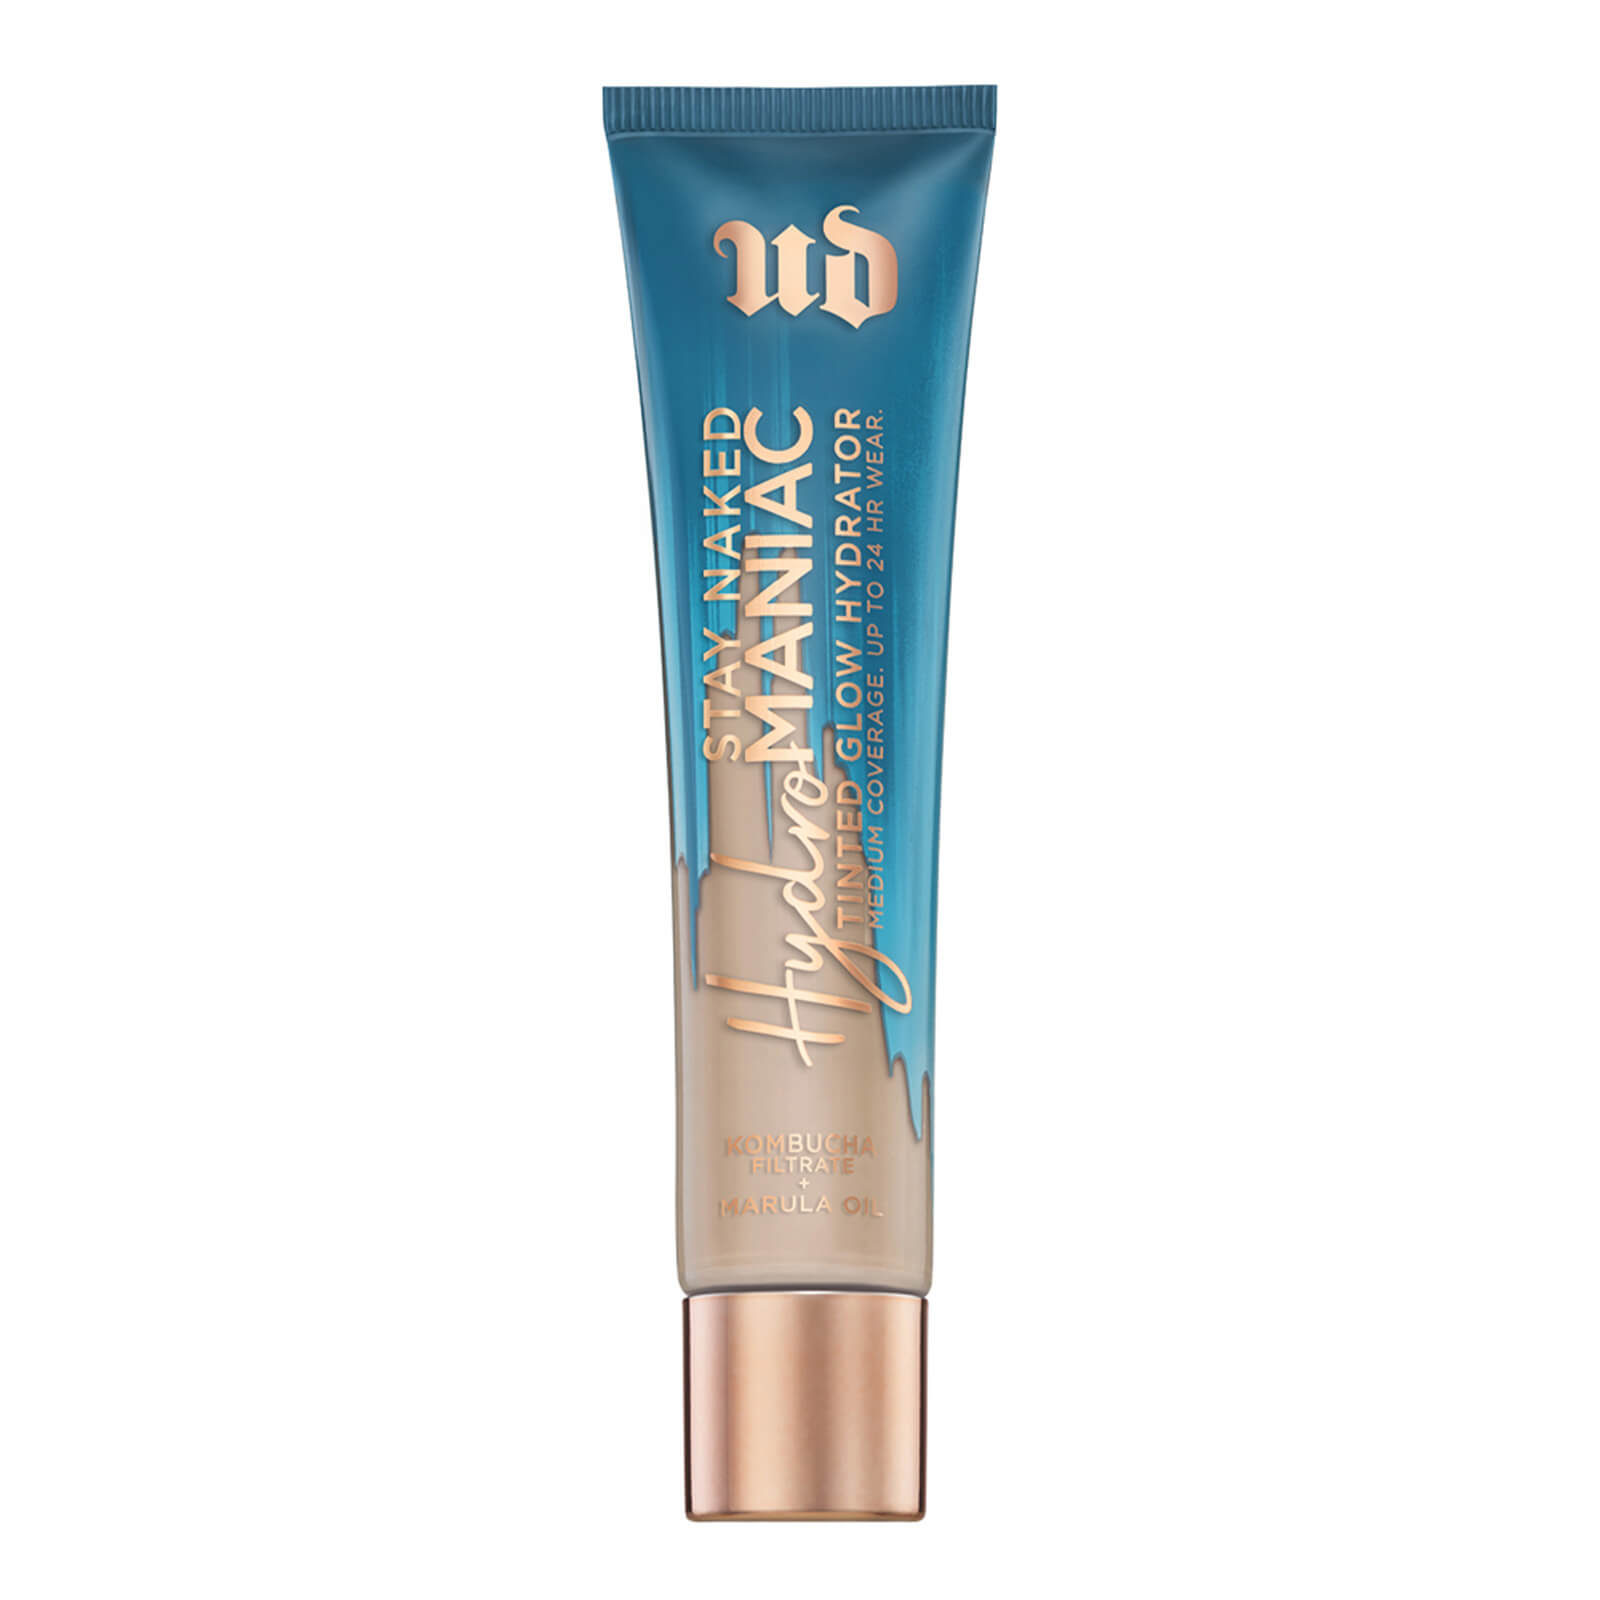 Image of Urban Decay Stay Naked Hydromaniac Tinted Glow Hydrator 35ml (Various Shades) - 30